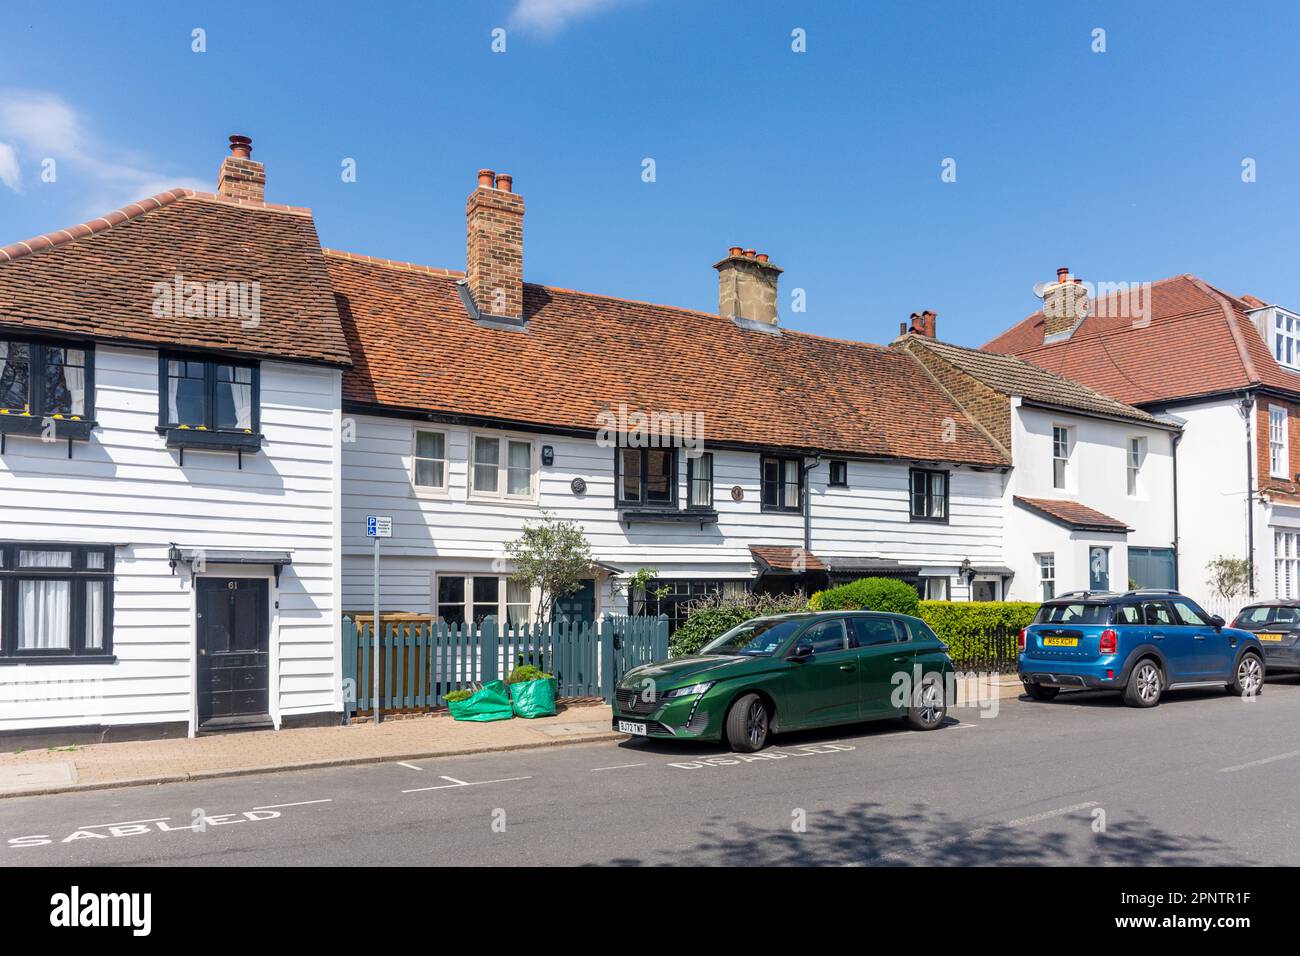 Period timber cottages, High Street, Thames Ditton, Surrey, England, United Kingdom Stock Photo